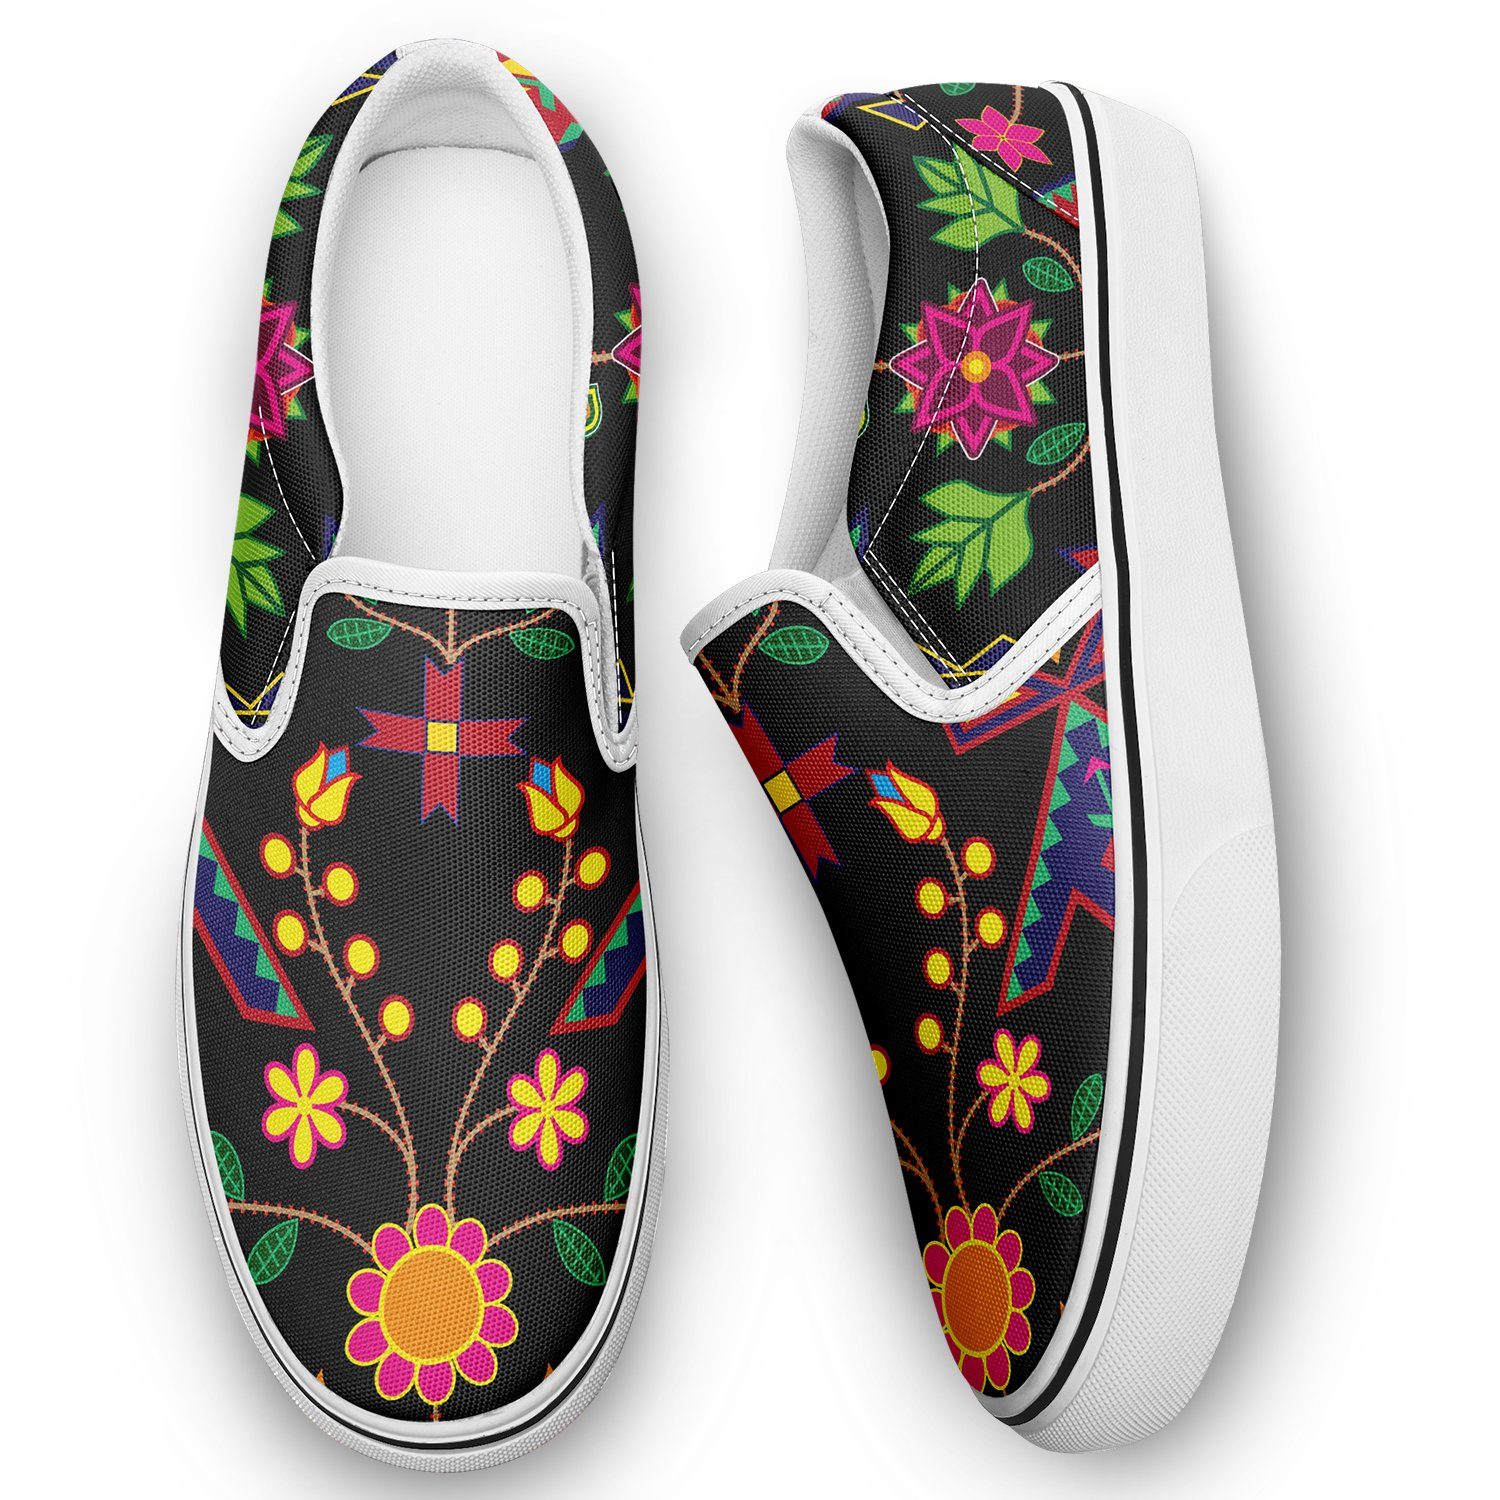 Geometric Floral Spring Black Otoyimm Canvas Slip On Shoes otoyimm Herman 